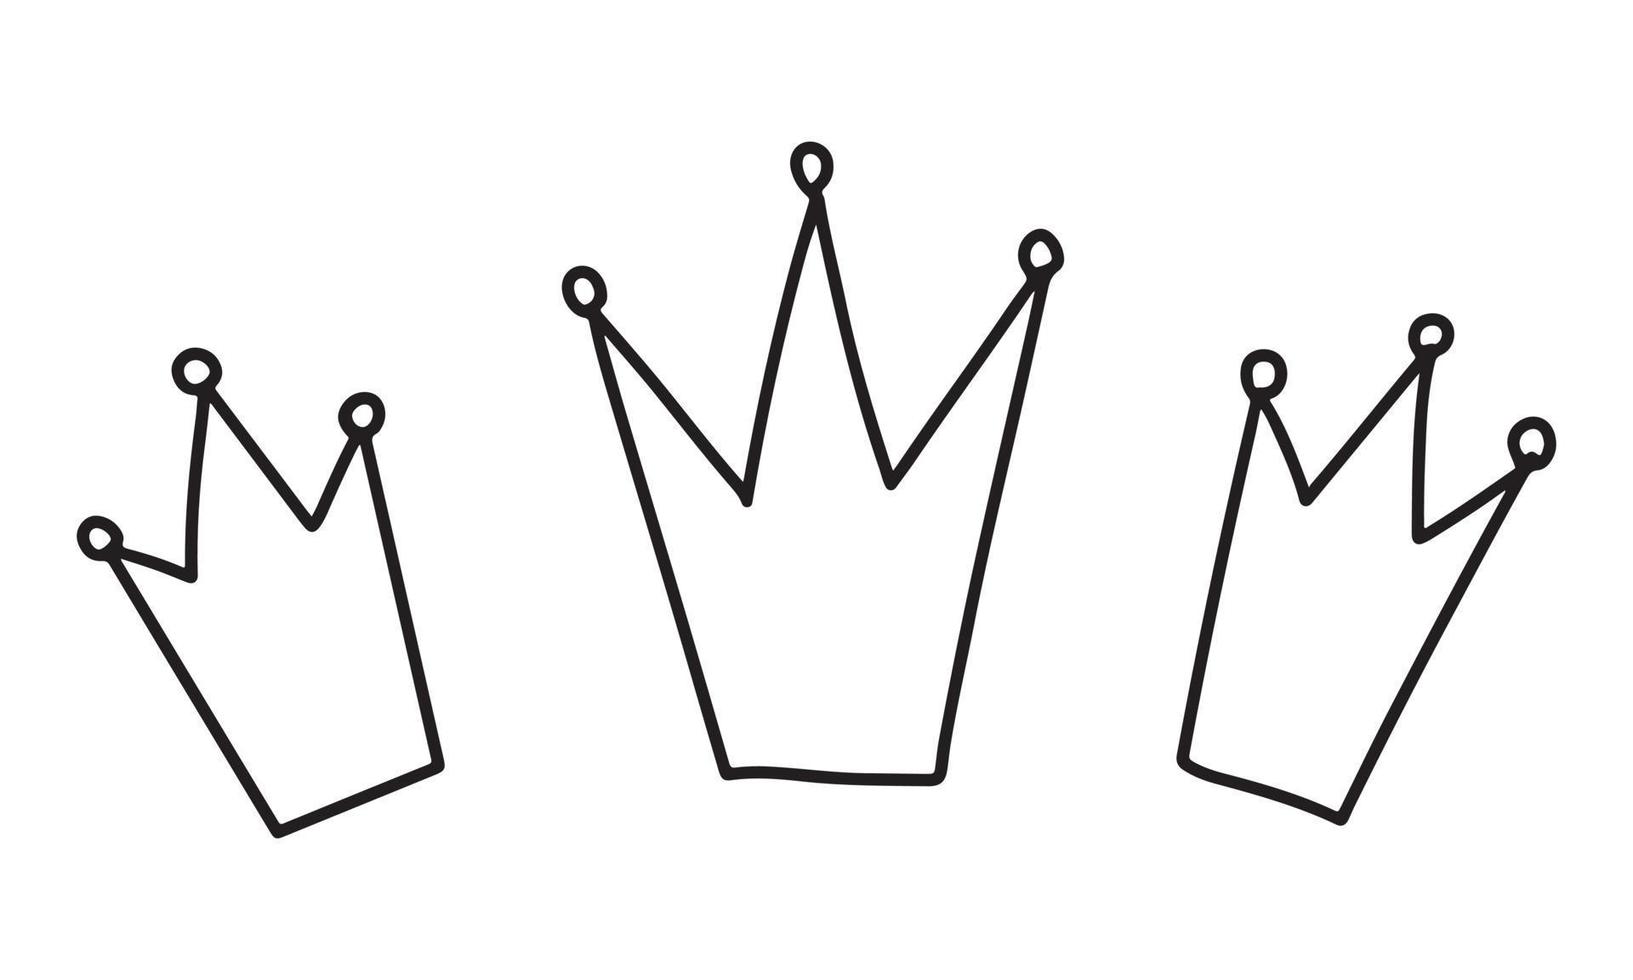 Three hand drawn crown icon for Three Kings Day, Epiphany feast day. Vector illustration in black outline isolated on white background. Clip art, design element